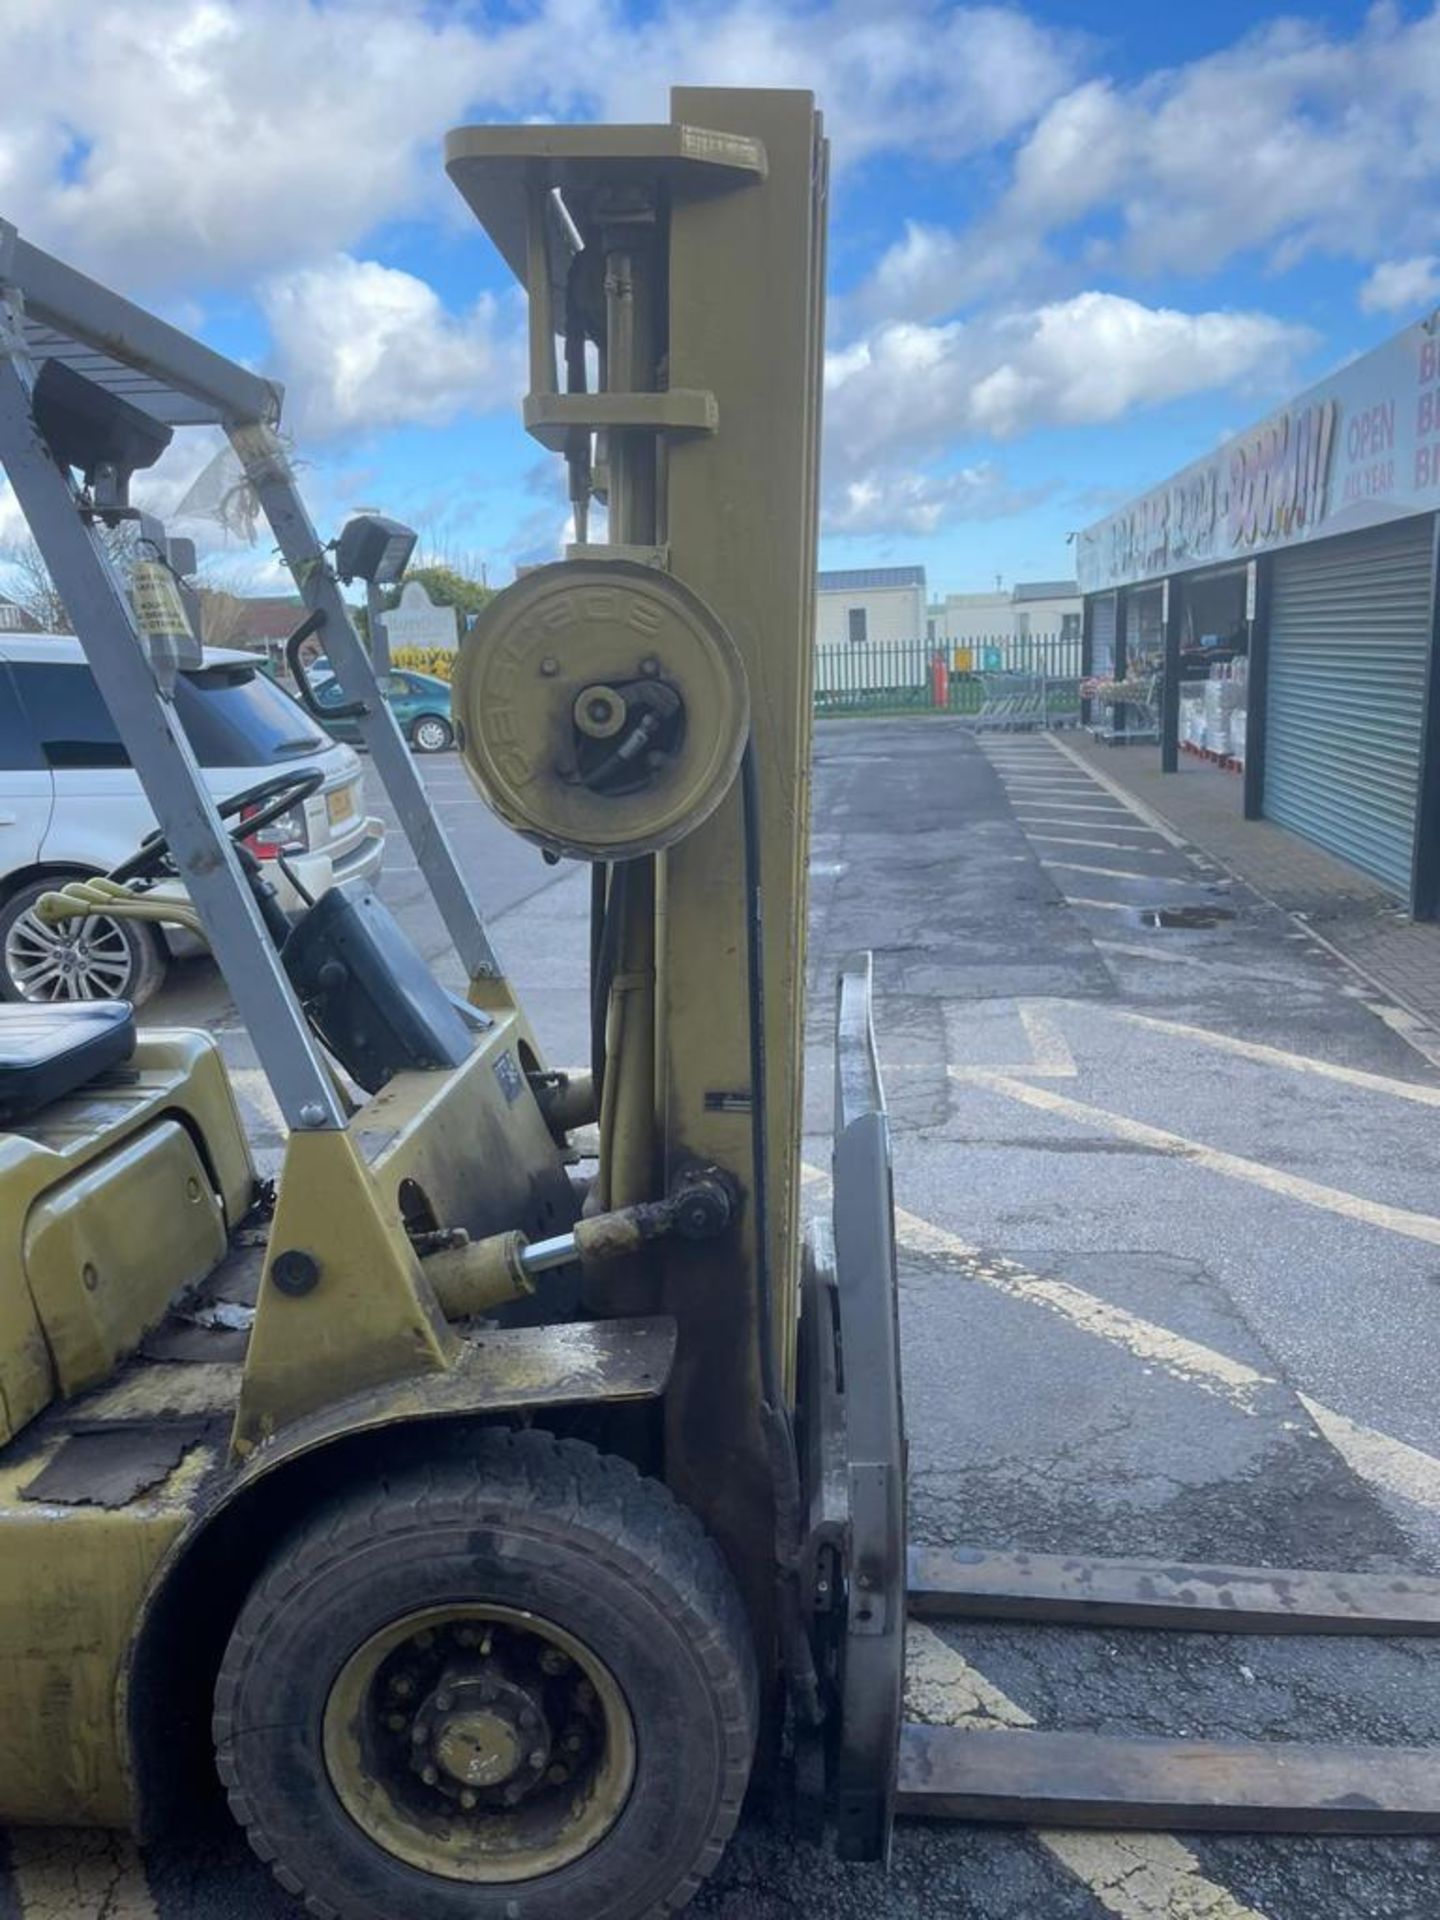 MITSUBISHI 2.5TON FORKLIFT - GAS LPG - 1988 - APPROX : 2000 HRS - FULLY WORKING ORDER - Image 3 of 7